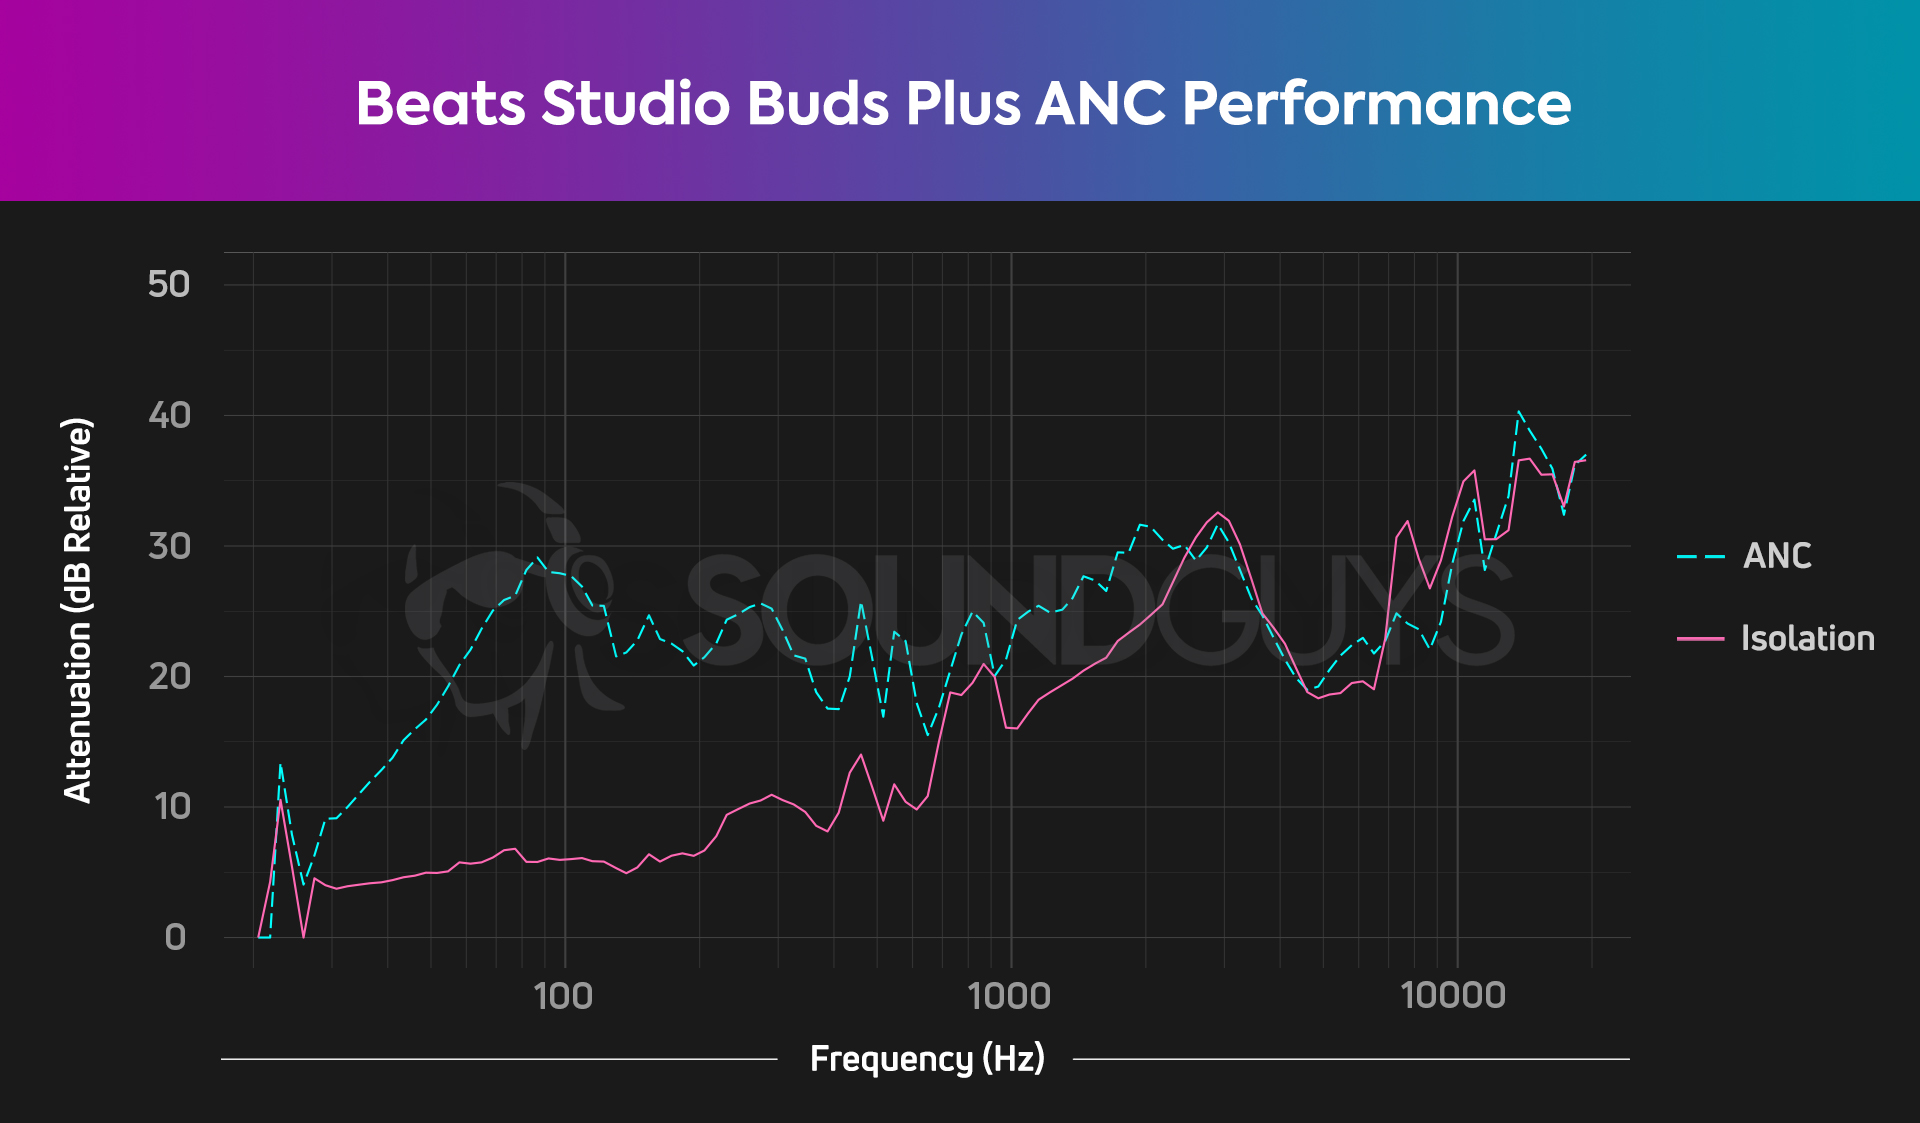 A chart showing the ANC performance of the Beats Studio Buds Plus.